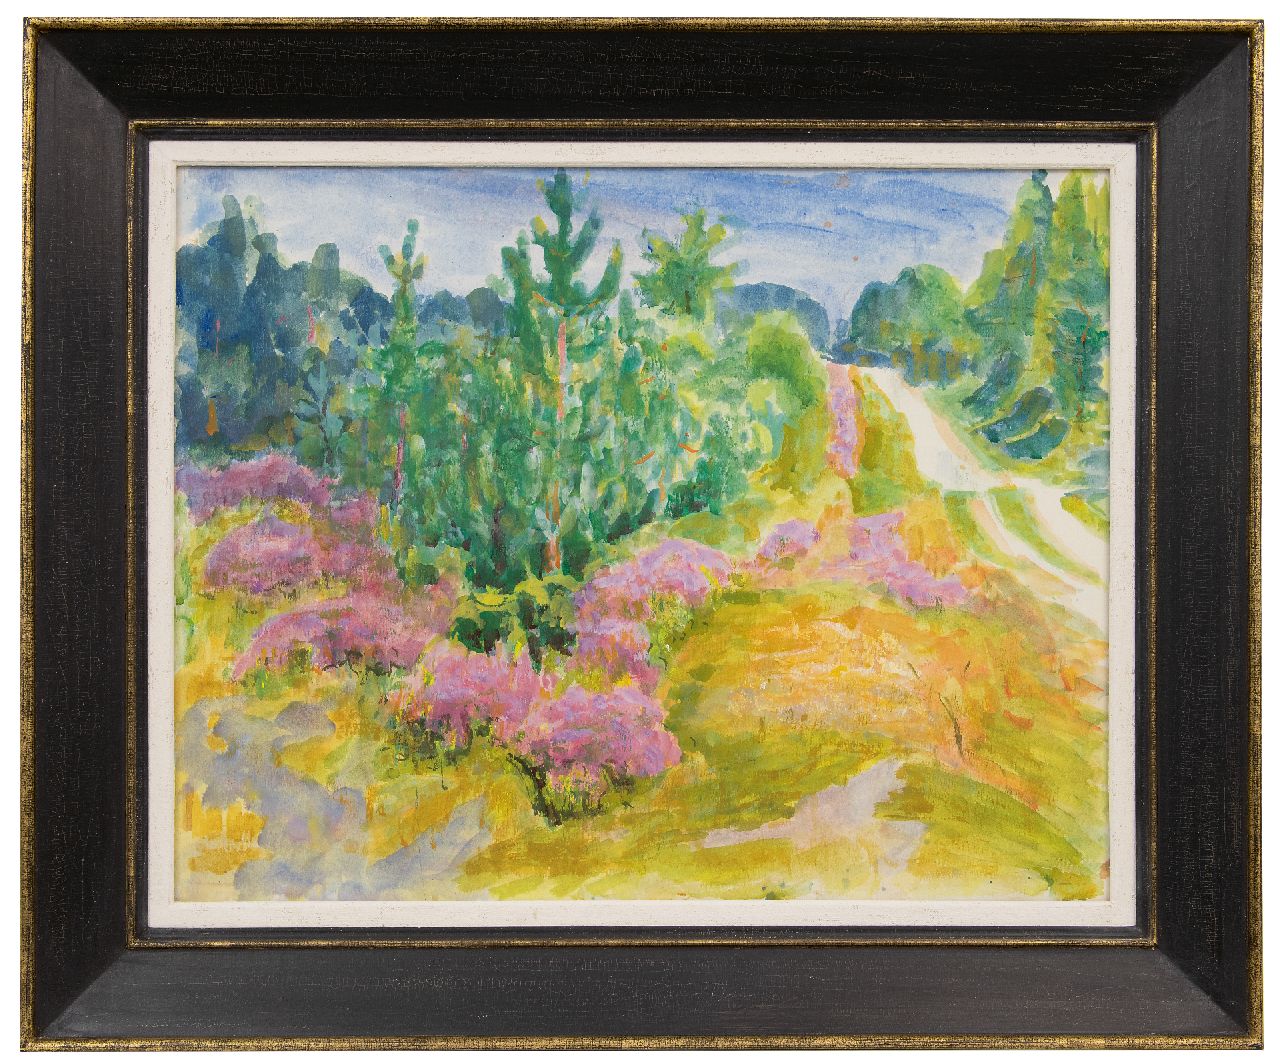 Altink J.  | Jan Altink, Country road through pine forest and flowering heather, watercolour on paper 54.9 x 69.8 cm